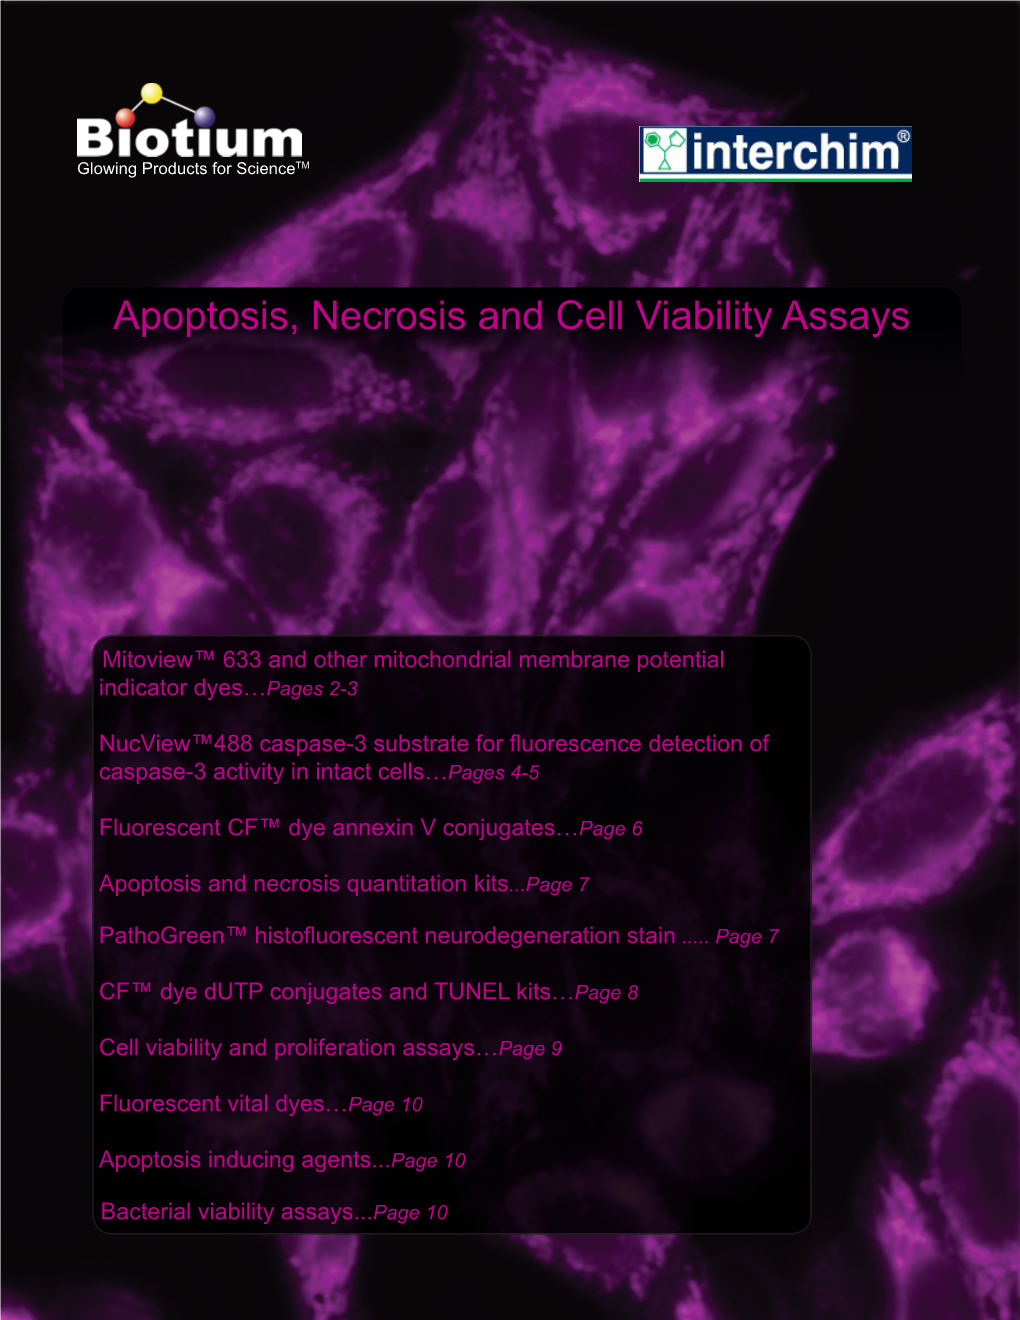 Apoptosis, Necrosis and Cell Viability Assays